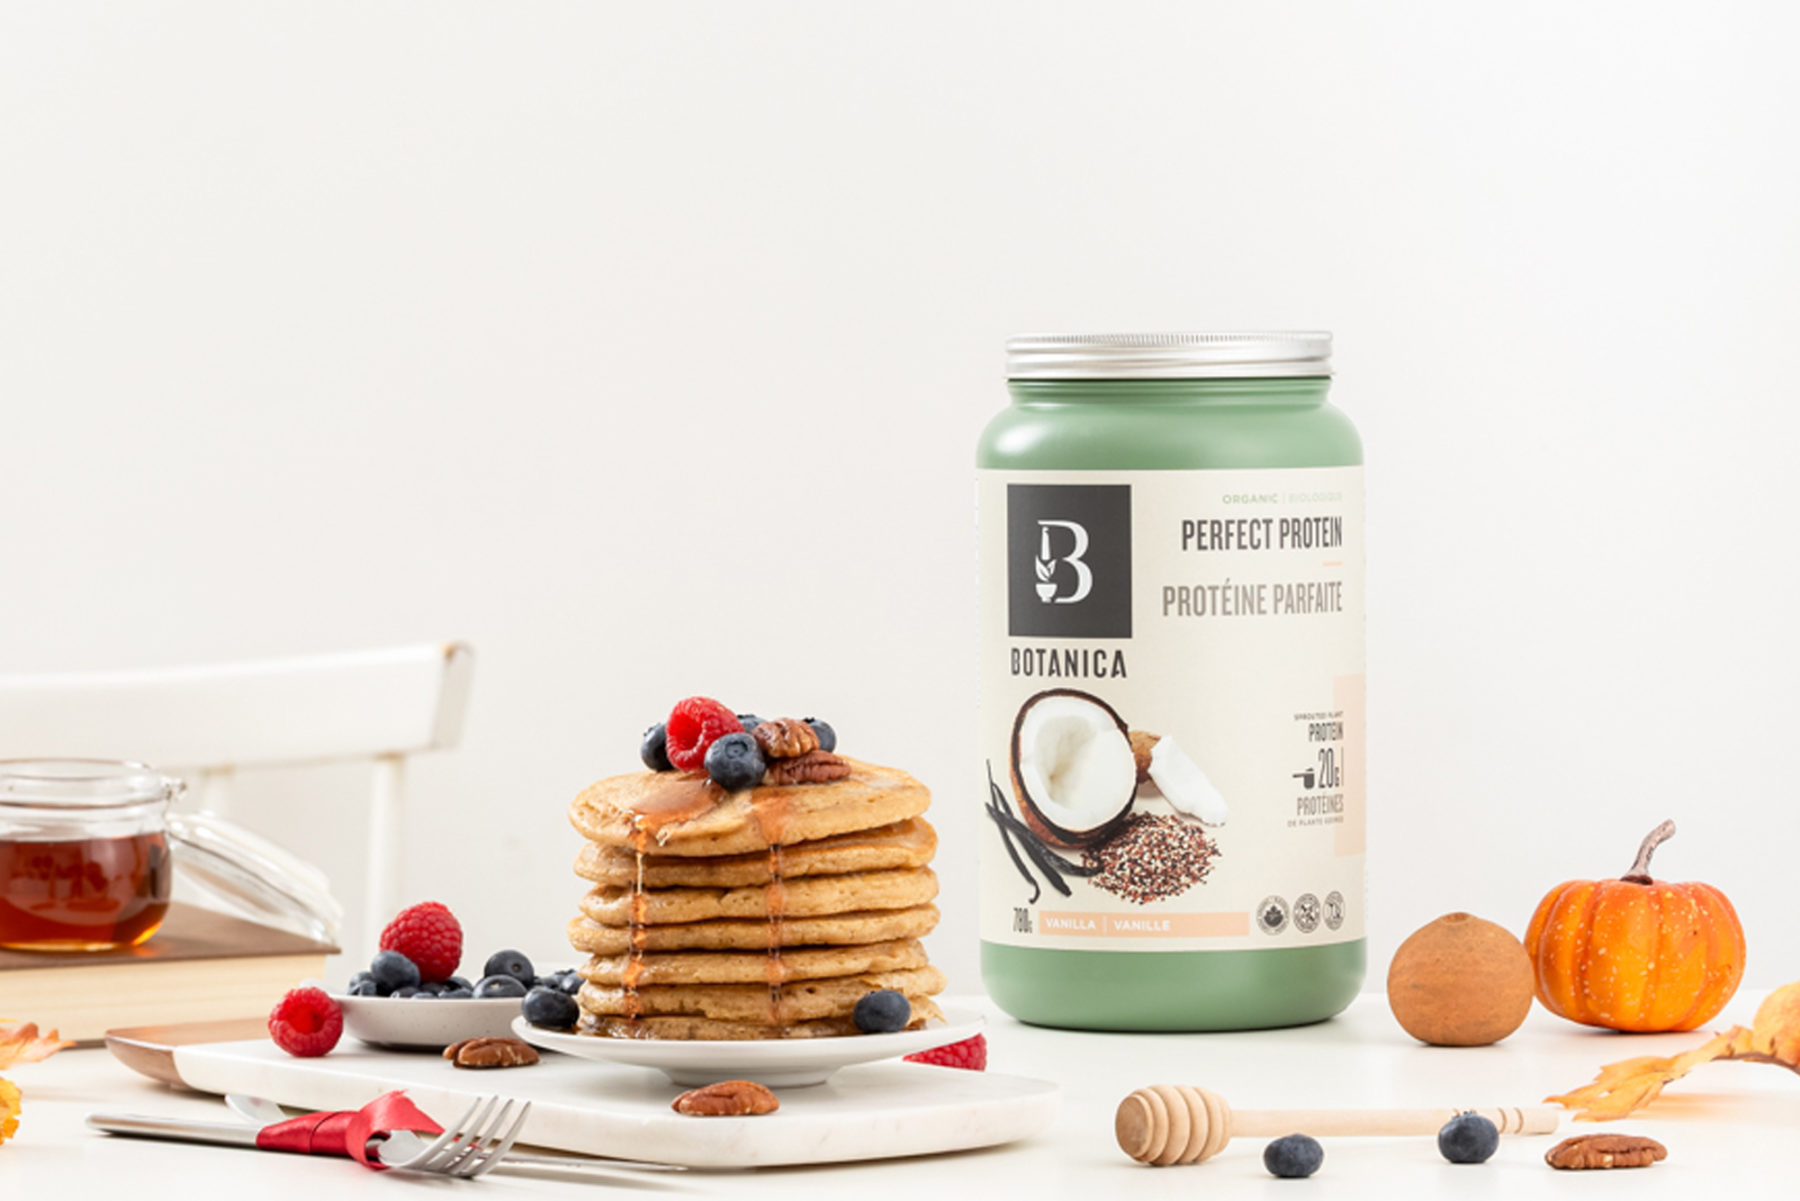 Protein pancakes made with Botanica Perfect Protein 